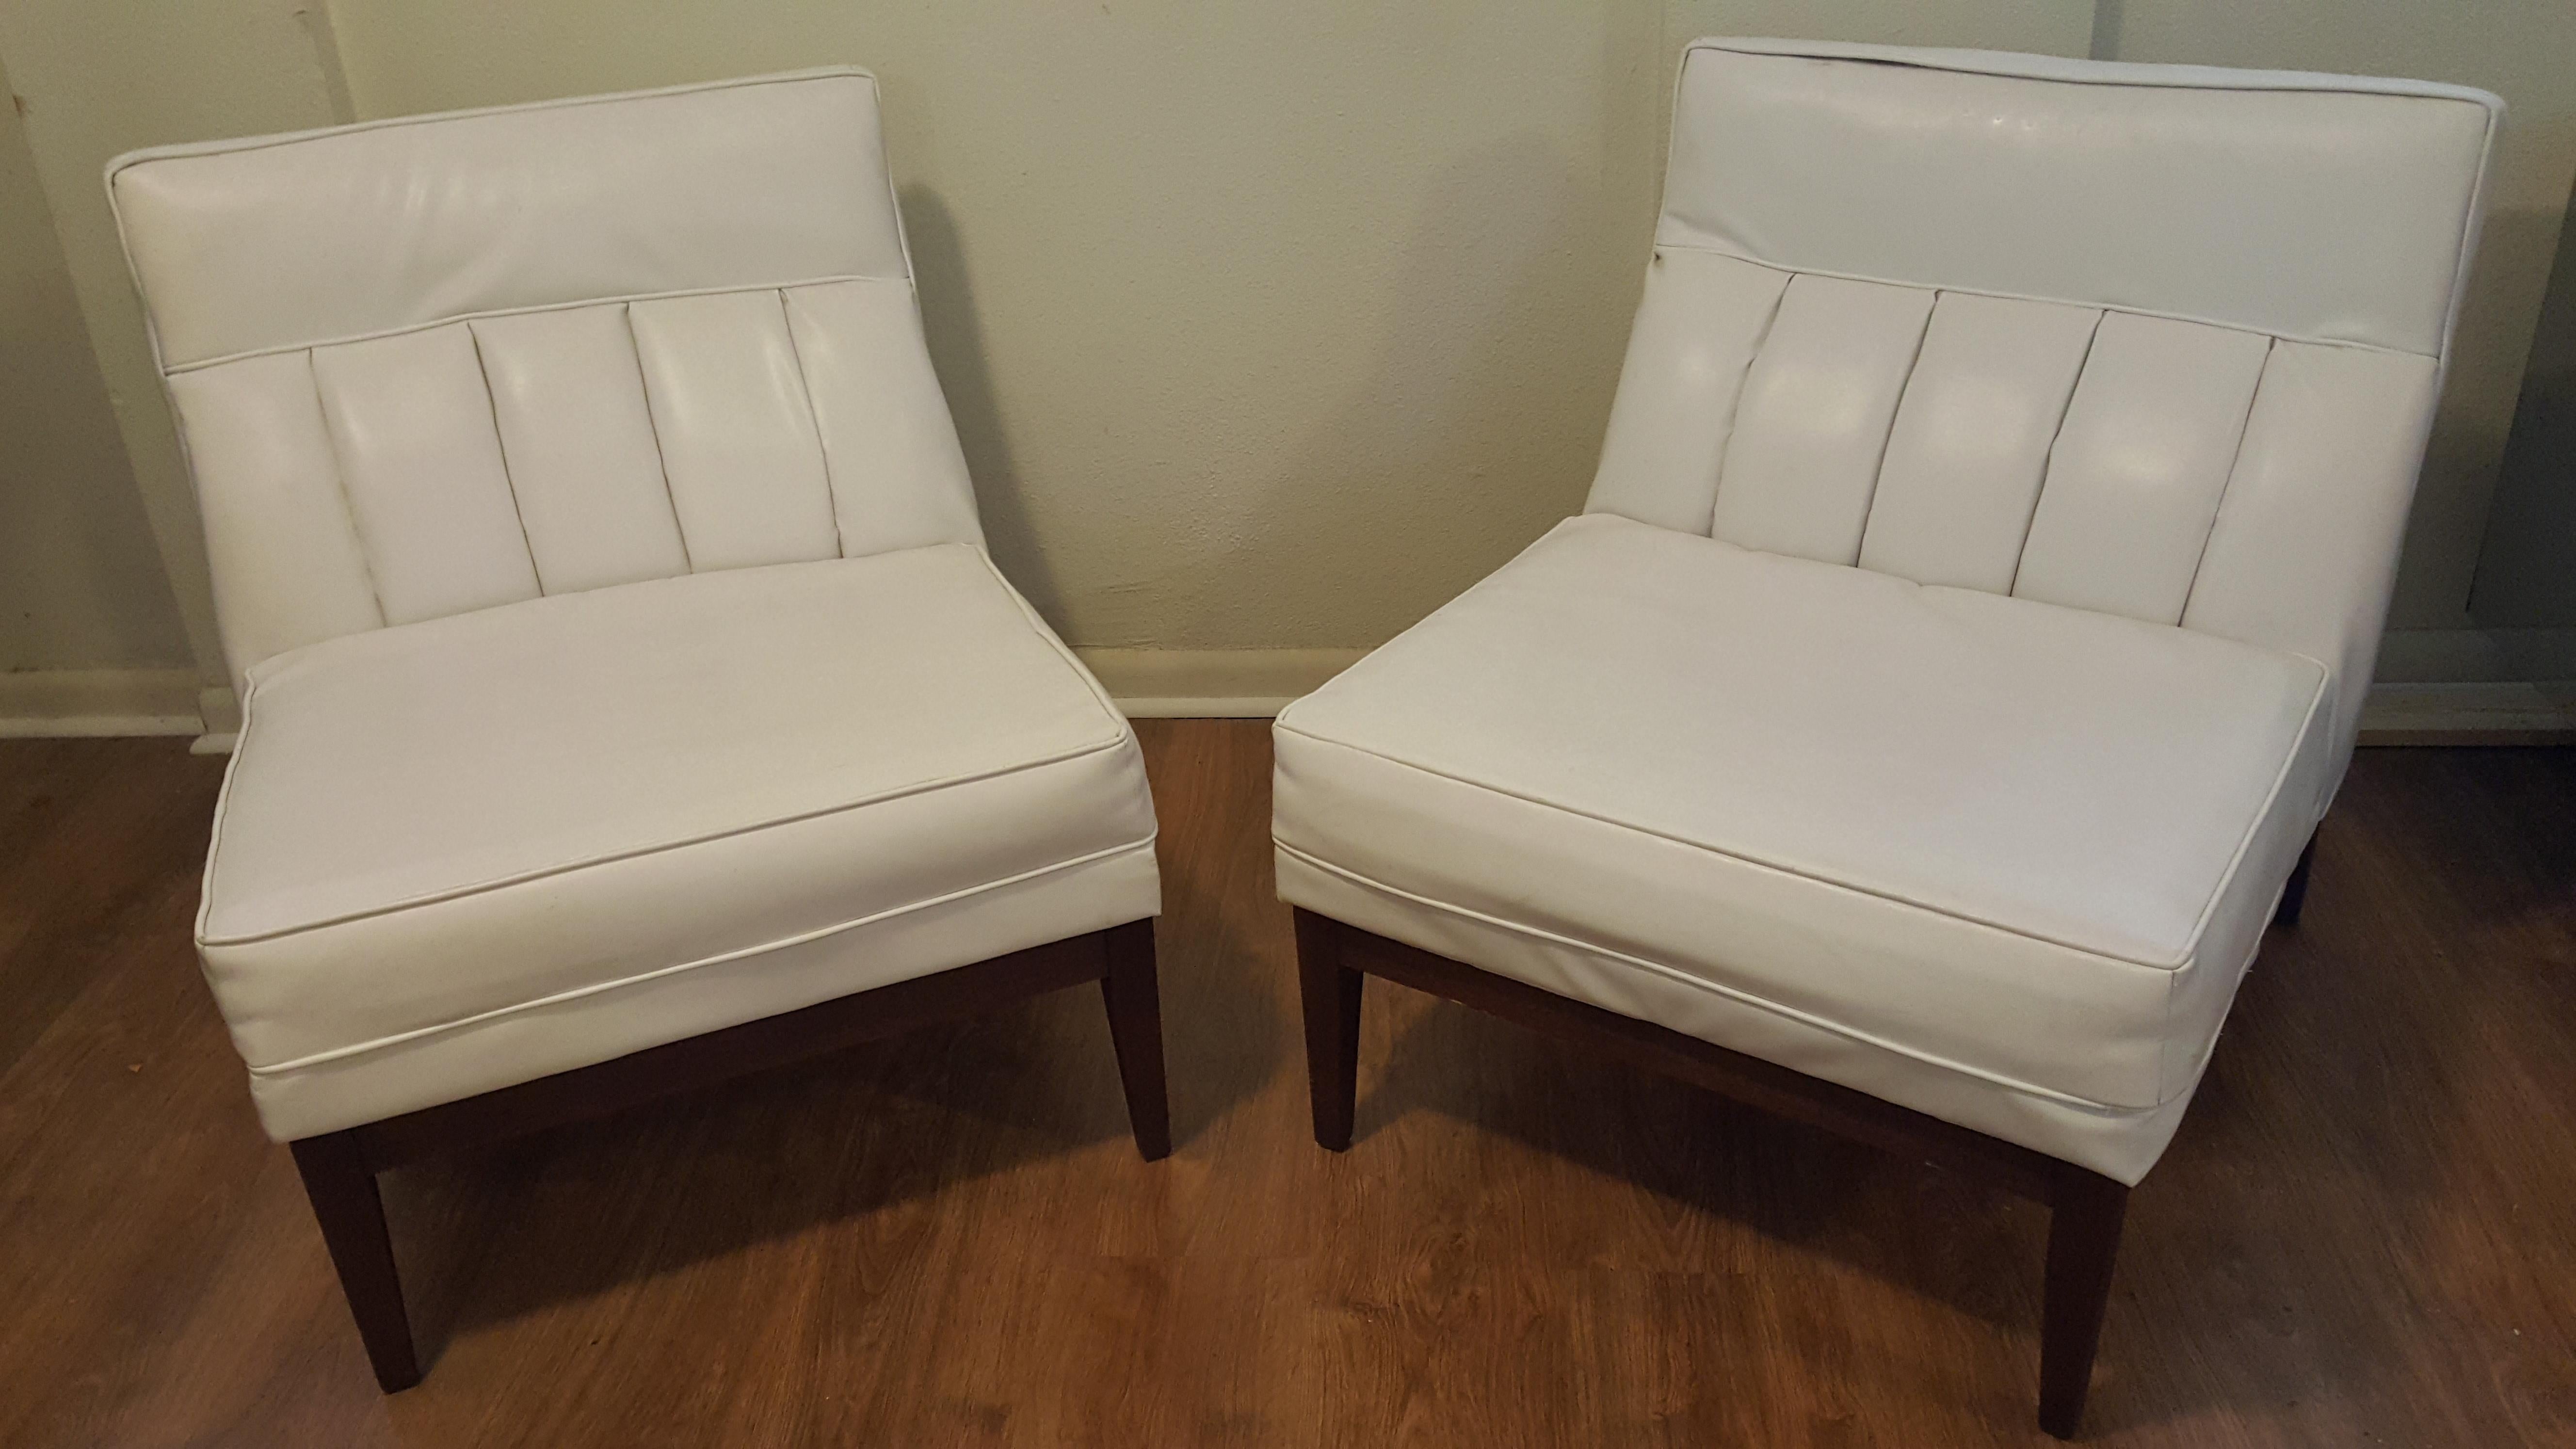 20th Century Pair of Midcentury Armless Slipper Chairs For Sale